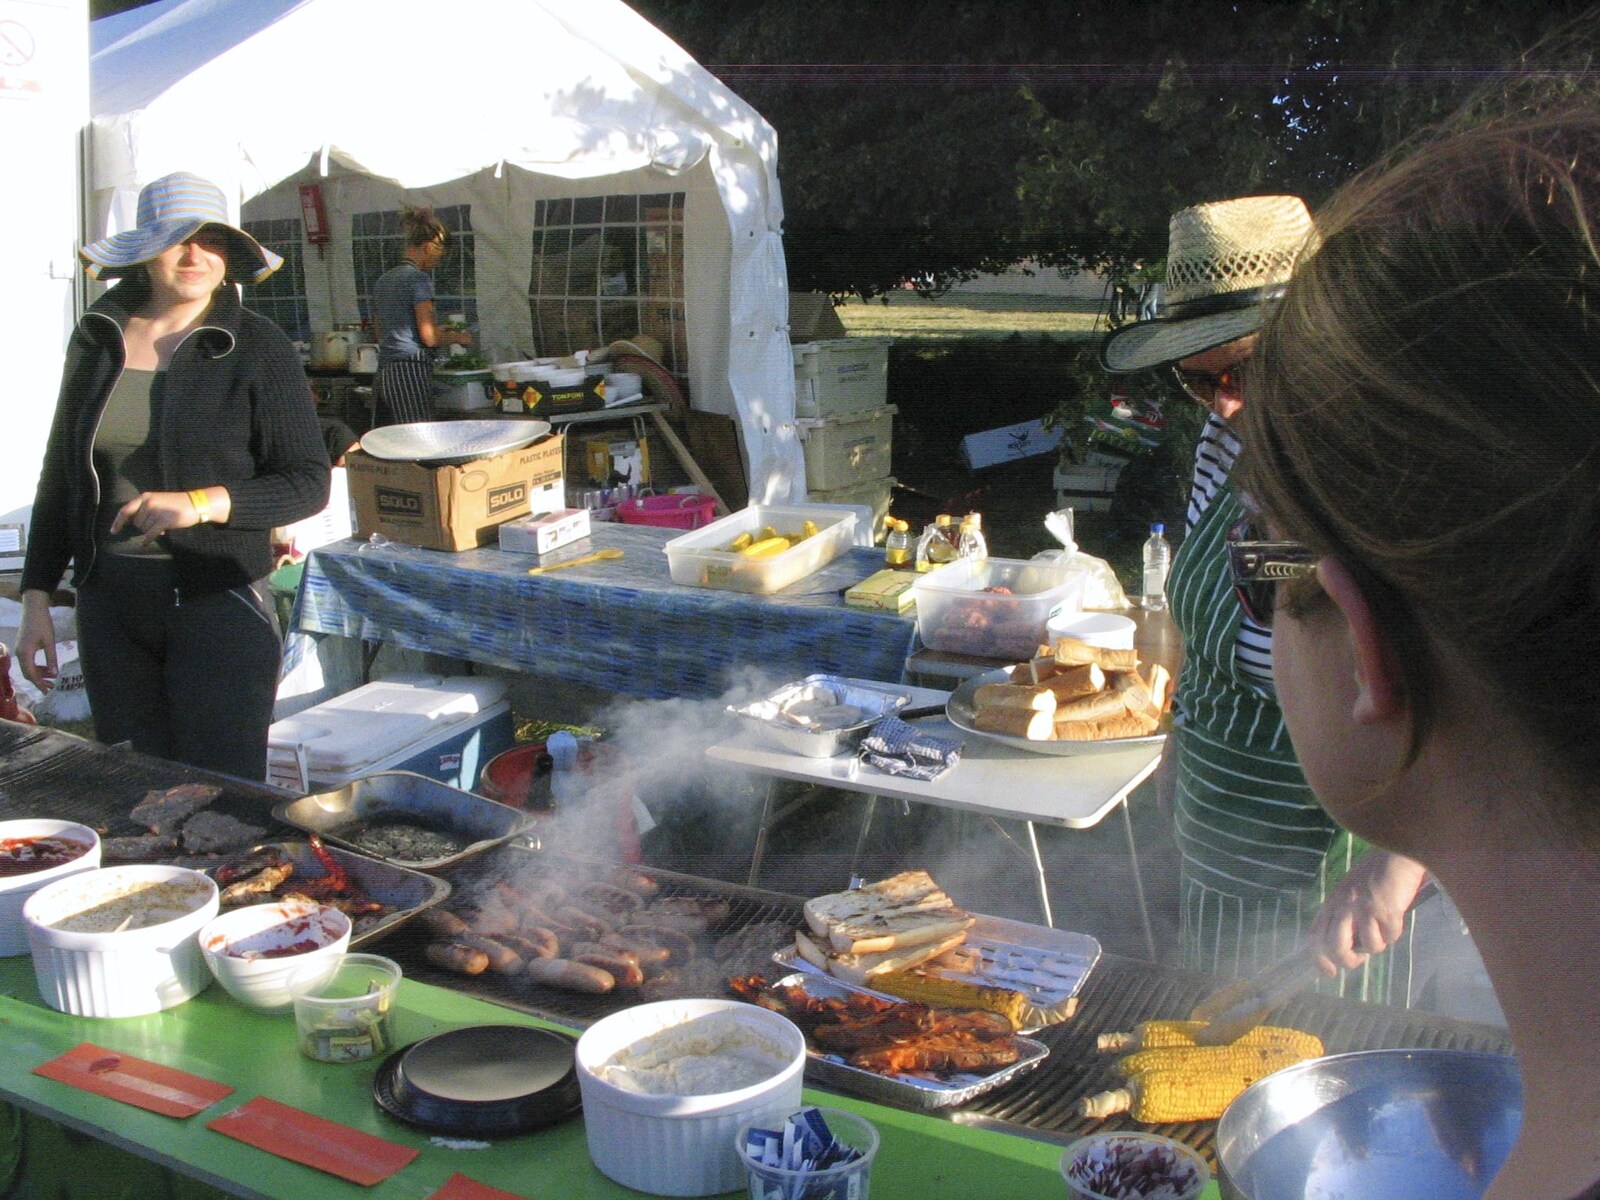 Isobel scopes the food out from The First Latitude Festival, Henham Park, Suffolk - 14th July 2006